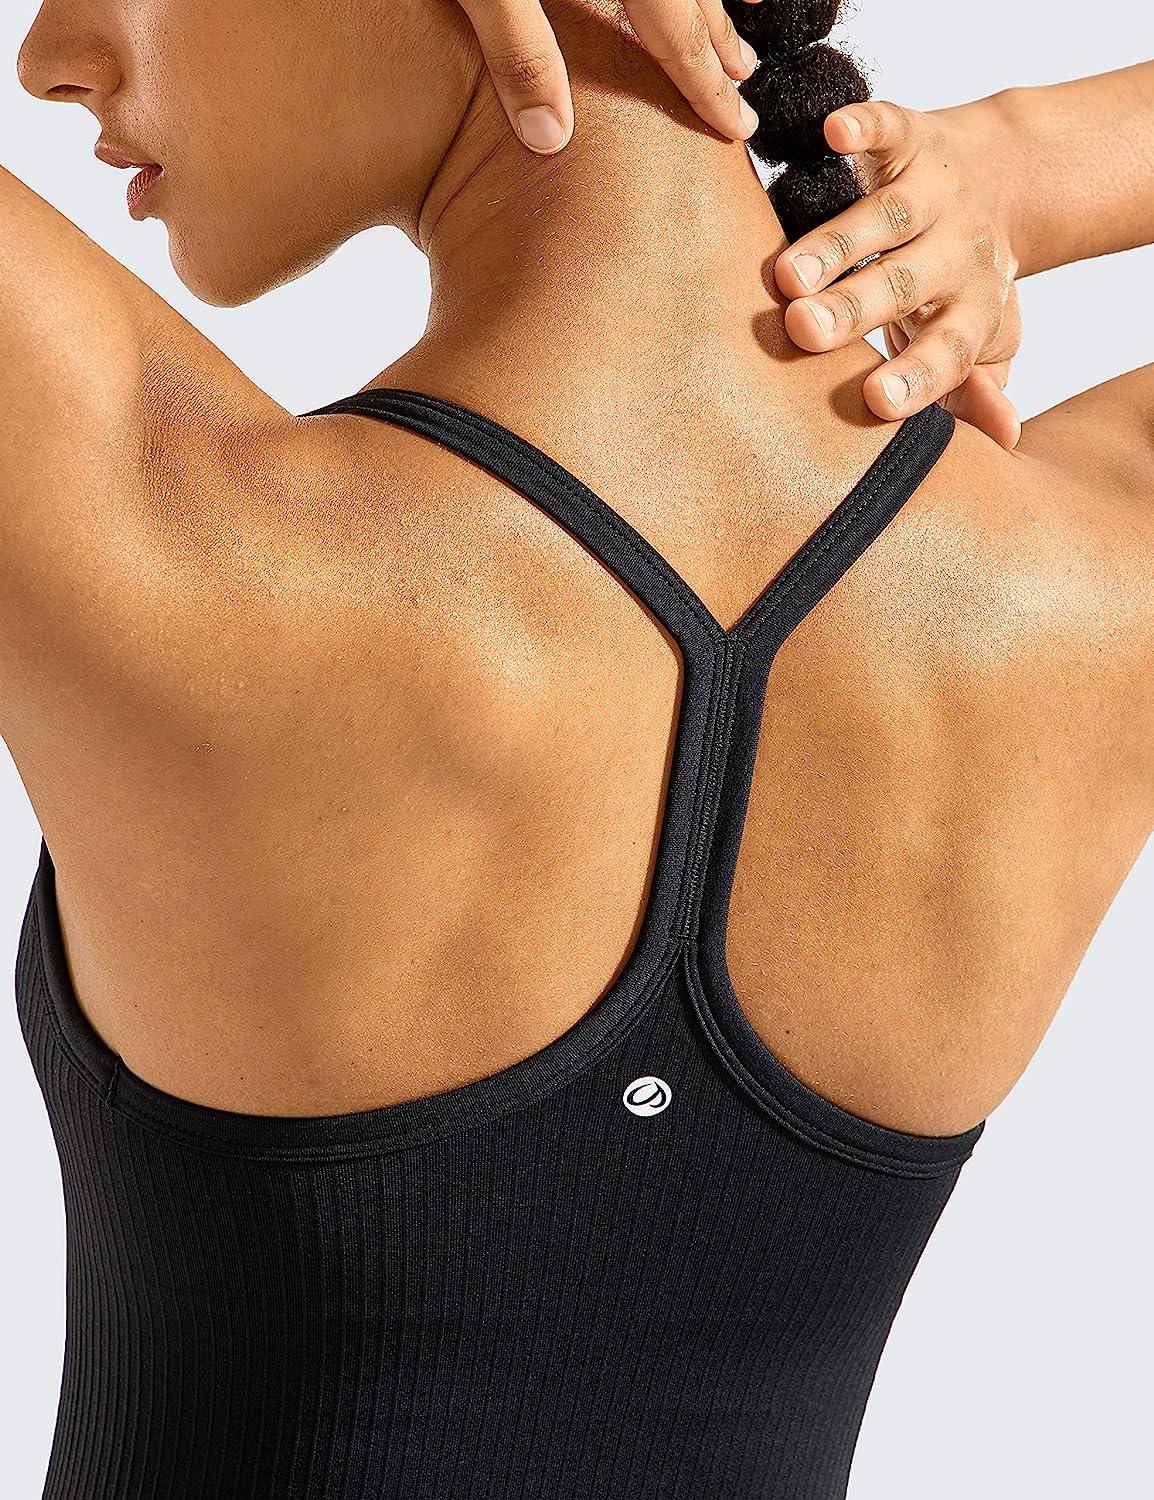 CRZ YOGA Workout Tank Top Women Racerback Athletic Ribbed Camisole